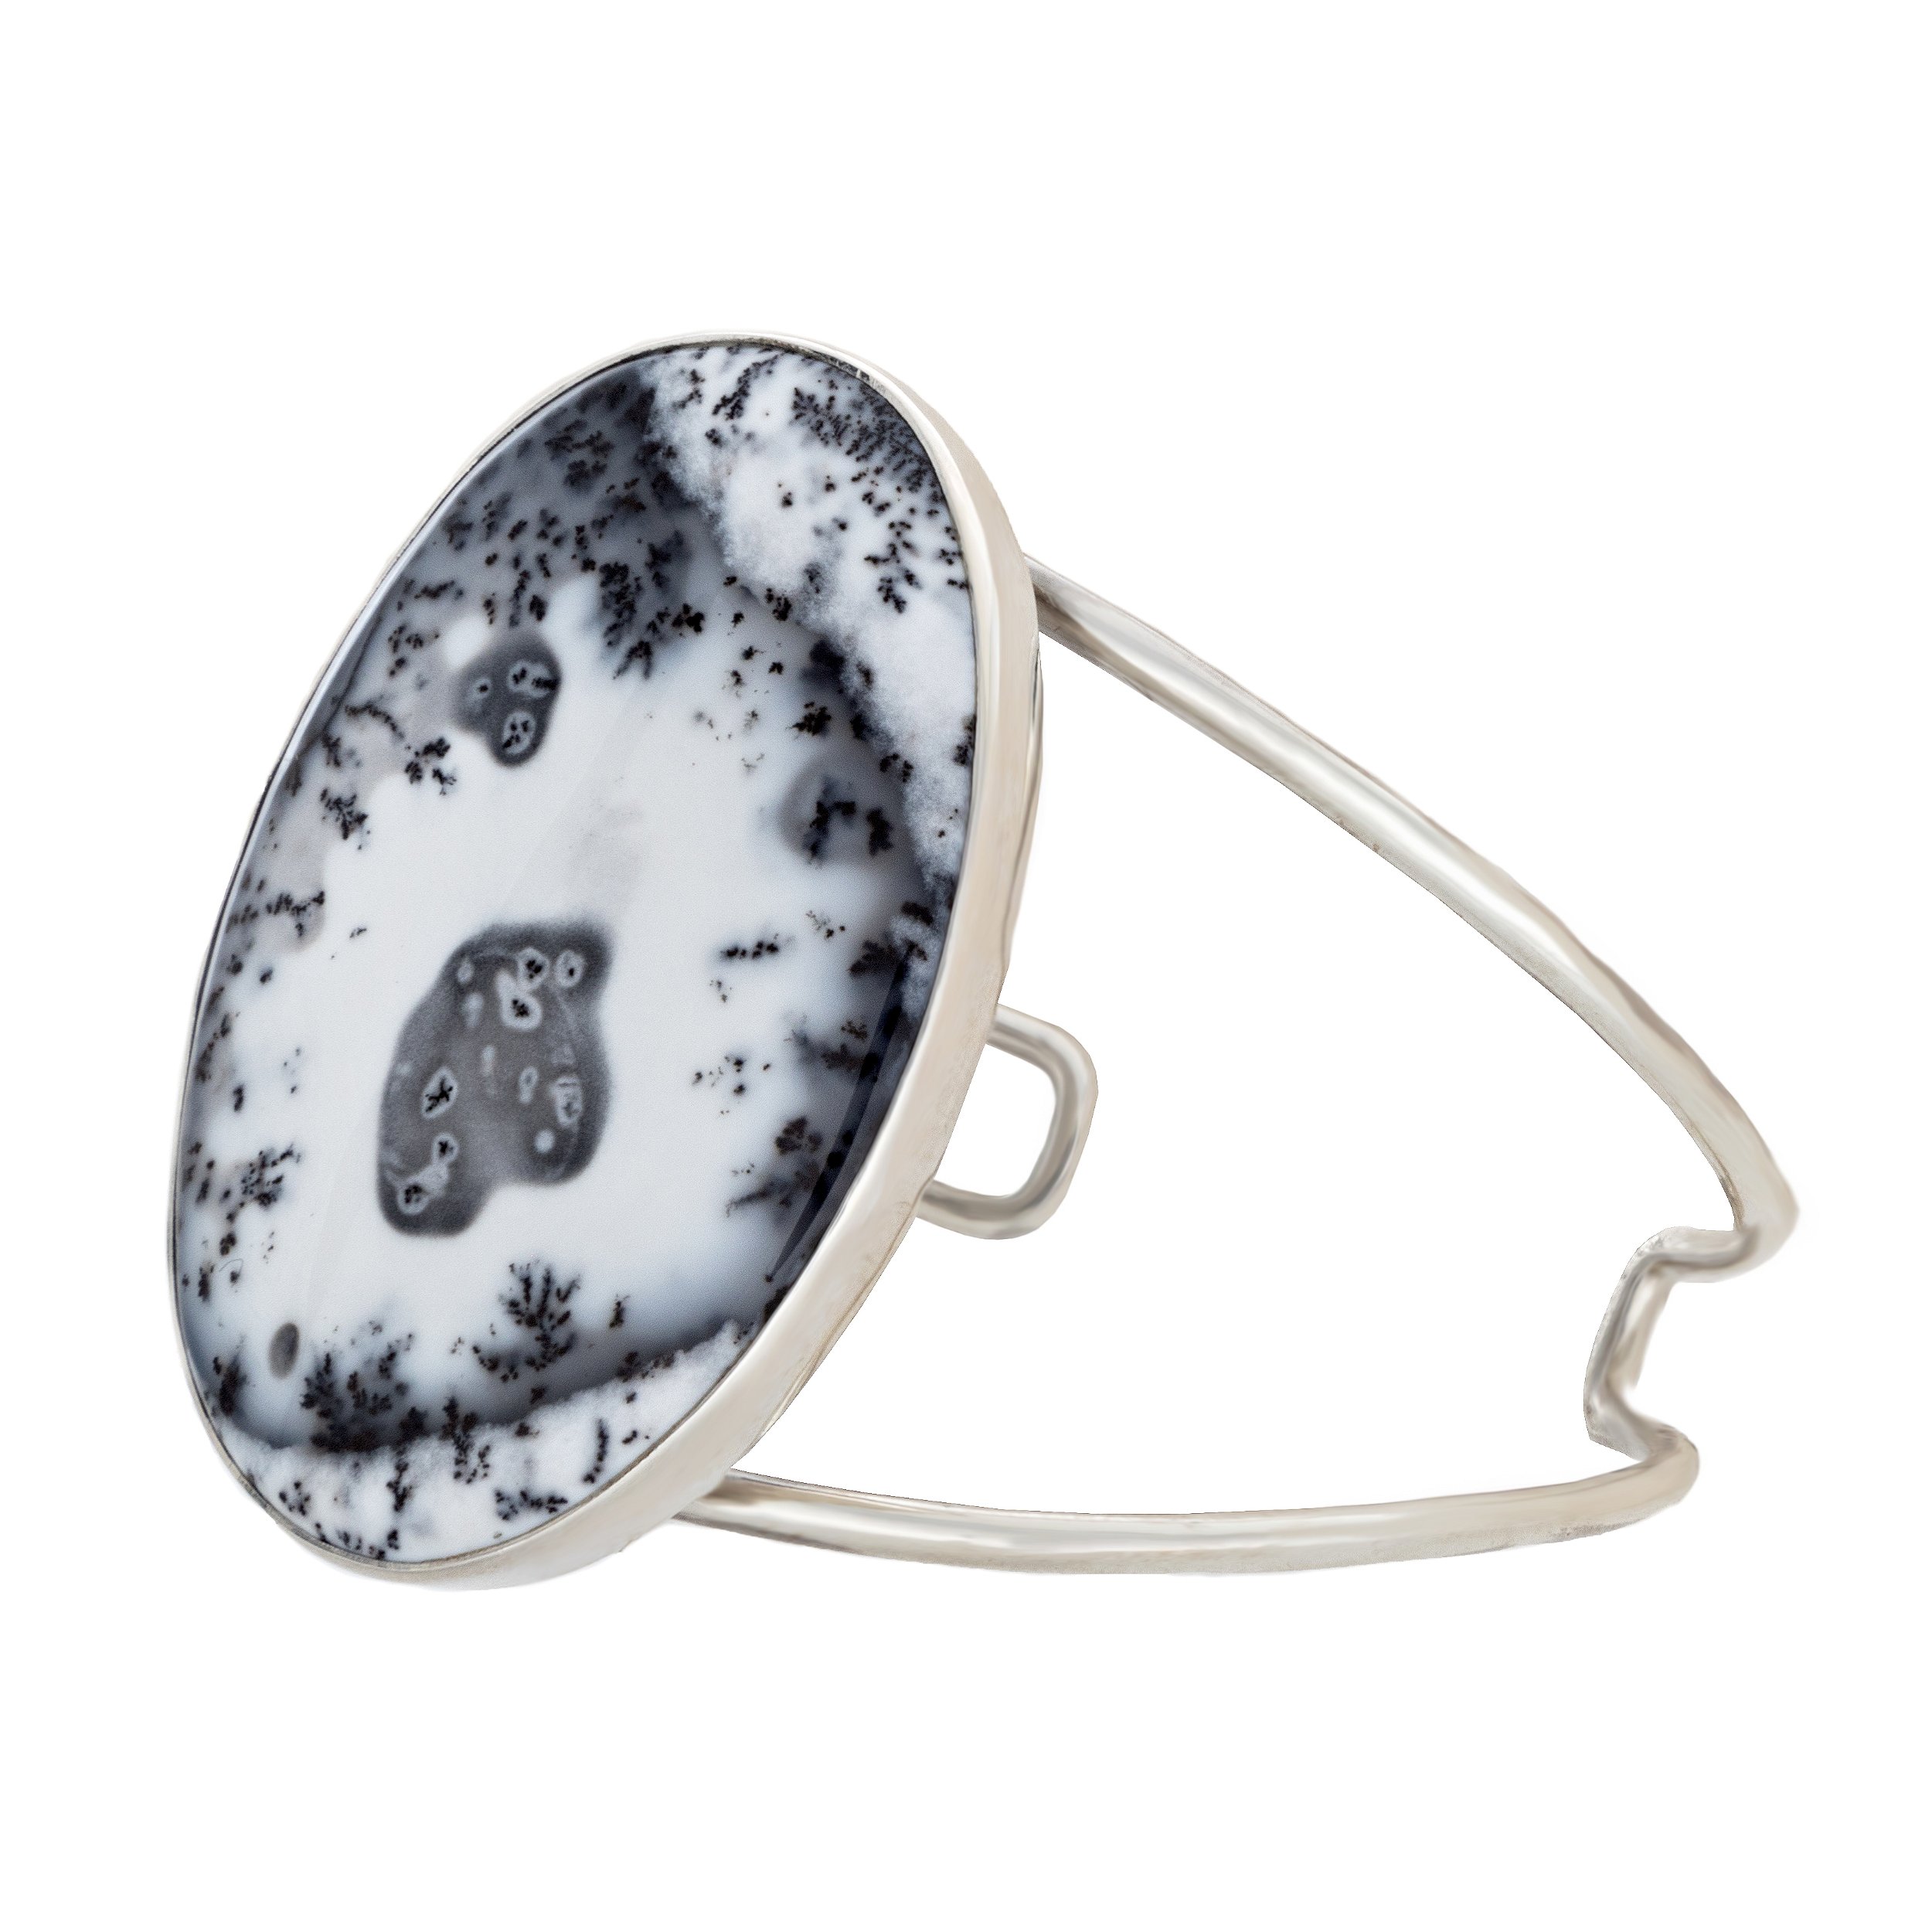 Dendritic Opal Cuff - Oval Cabochon With Sterling Silver Bezel On Open Double Cuff - 2"+